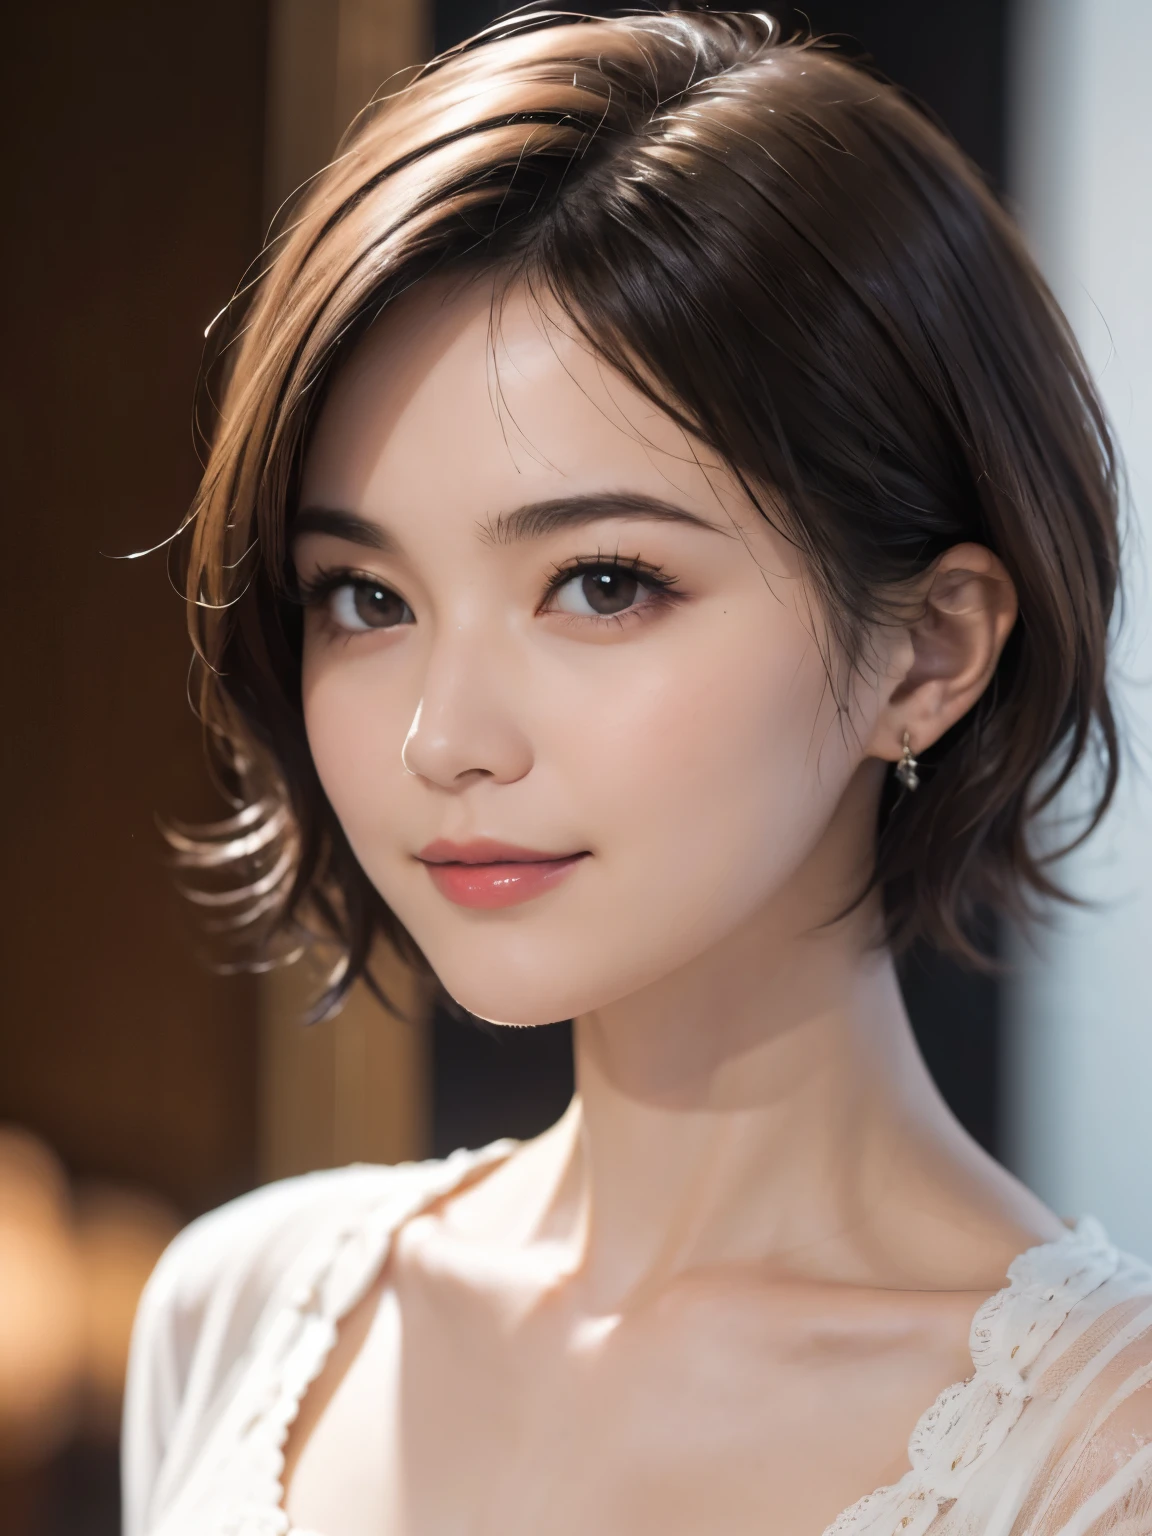 143
(20 year old woman), (surreal), (High level image quality), ((beautiful hairstyle 46)), ((short hair:1.46)), (gentle smile), (breasted:1.1), (lipstick)